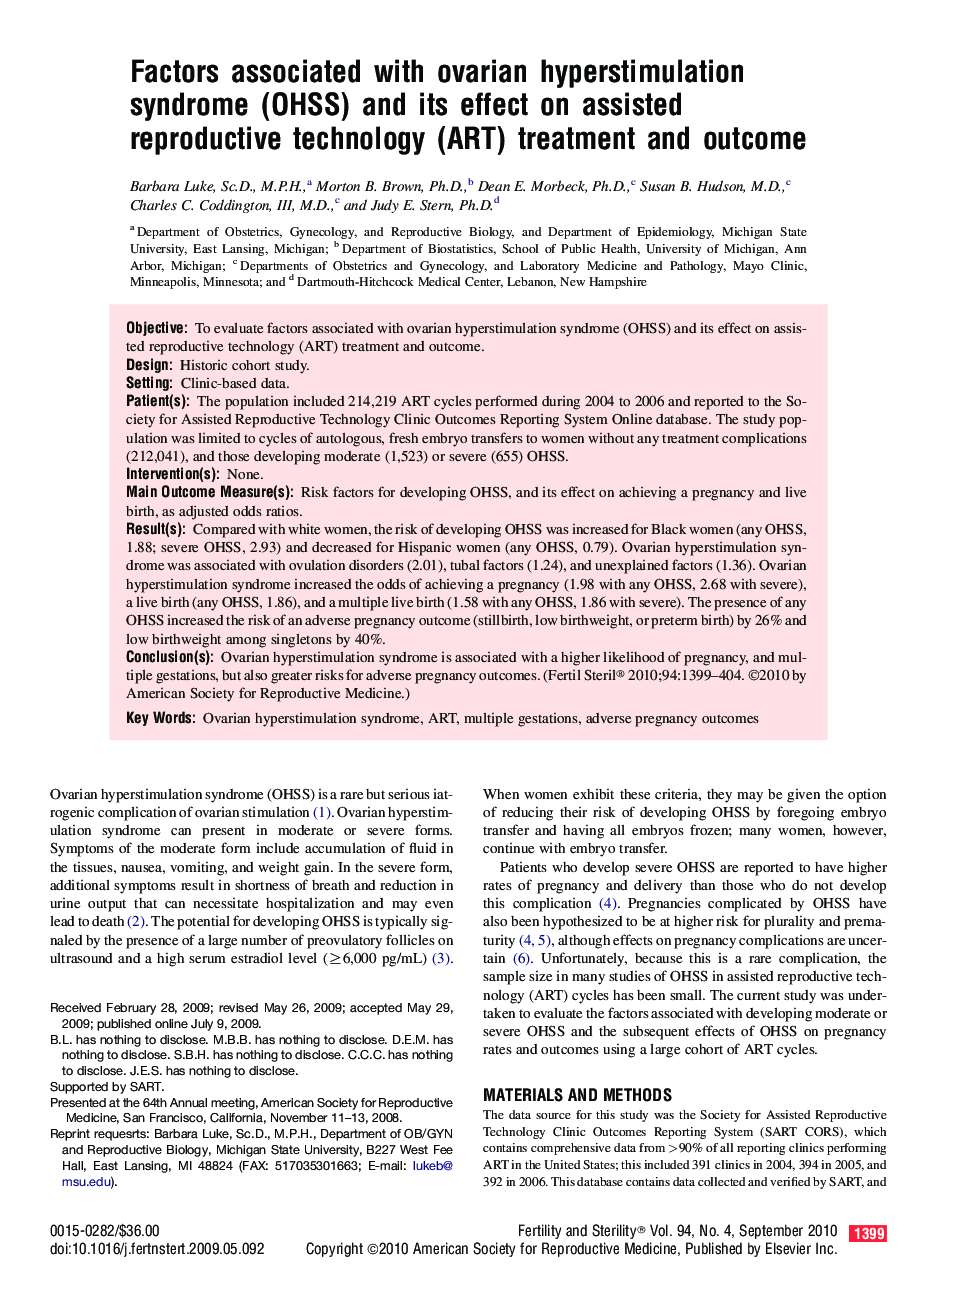 Factors associated with ovarian hyperstimulation syndrome (OHSS) and its effect on assisted reproductive technology (ART) treatment and outcome 